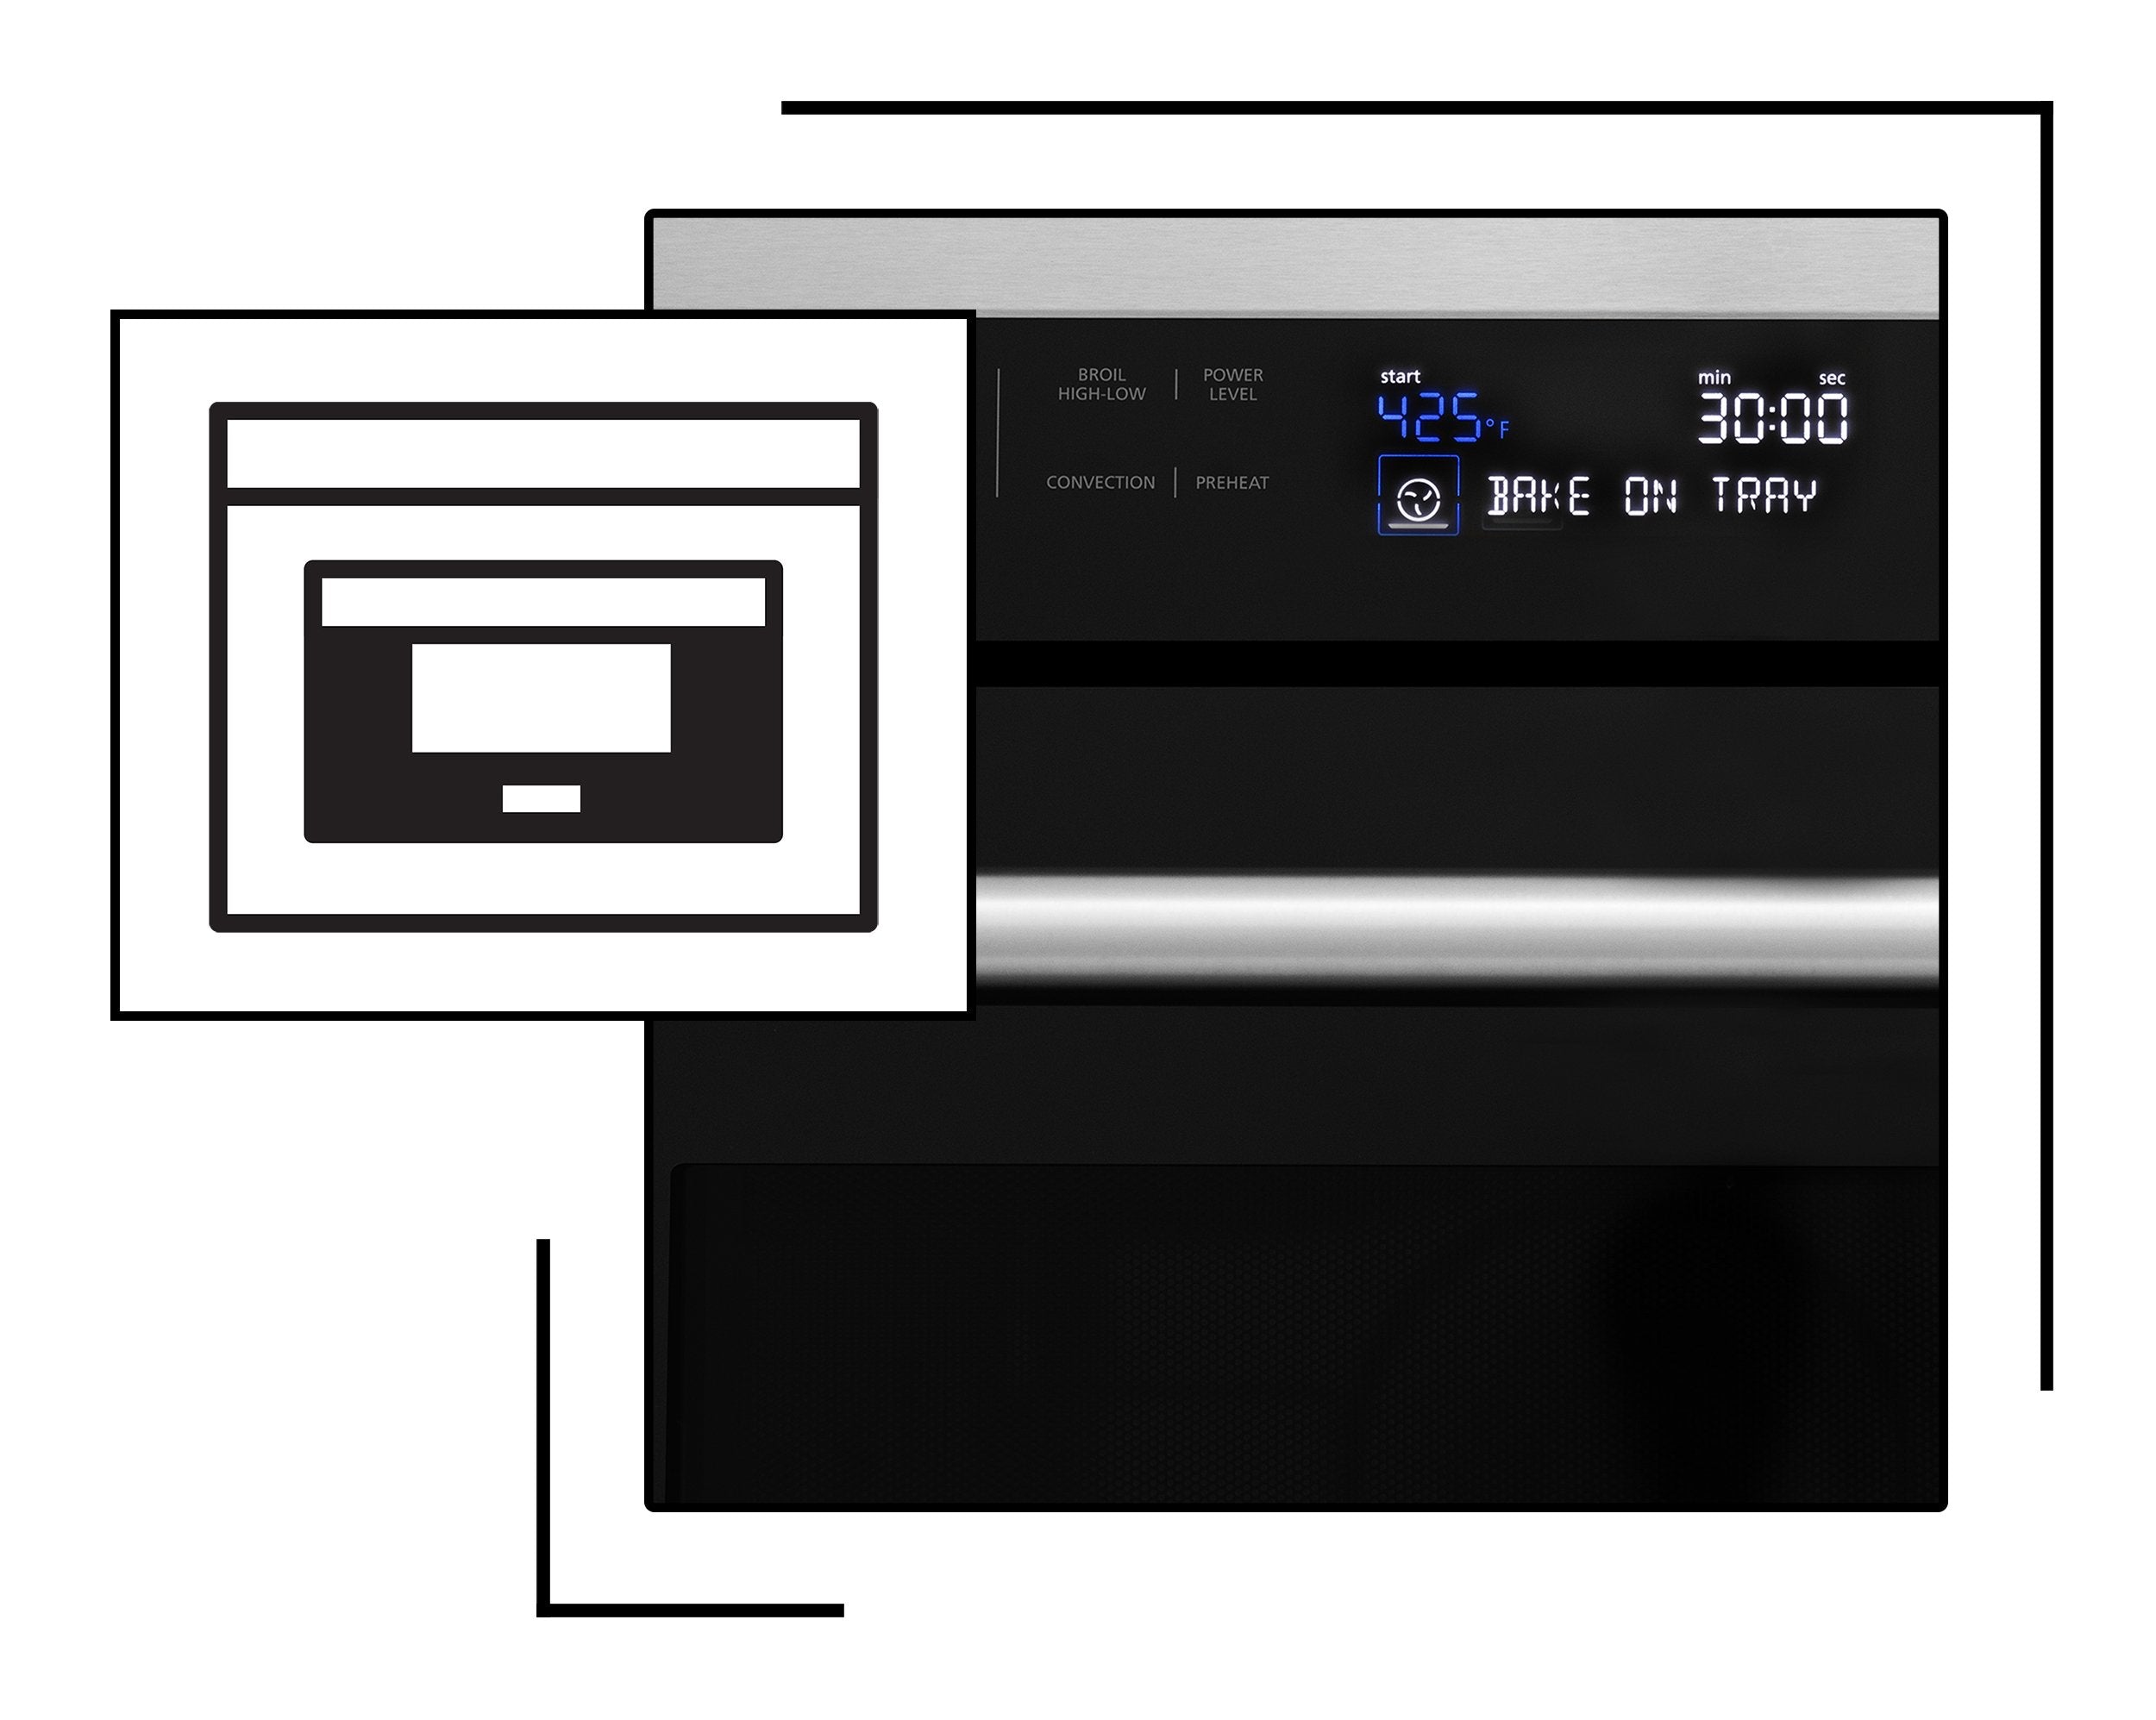 Icon and image representing microwave with one-touch control